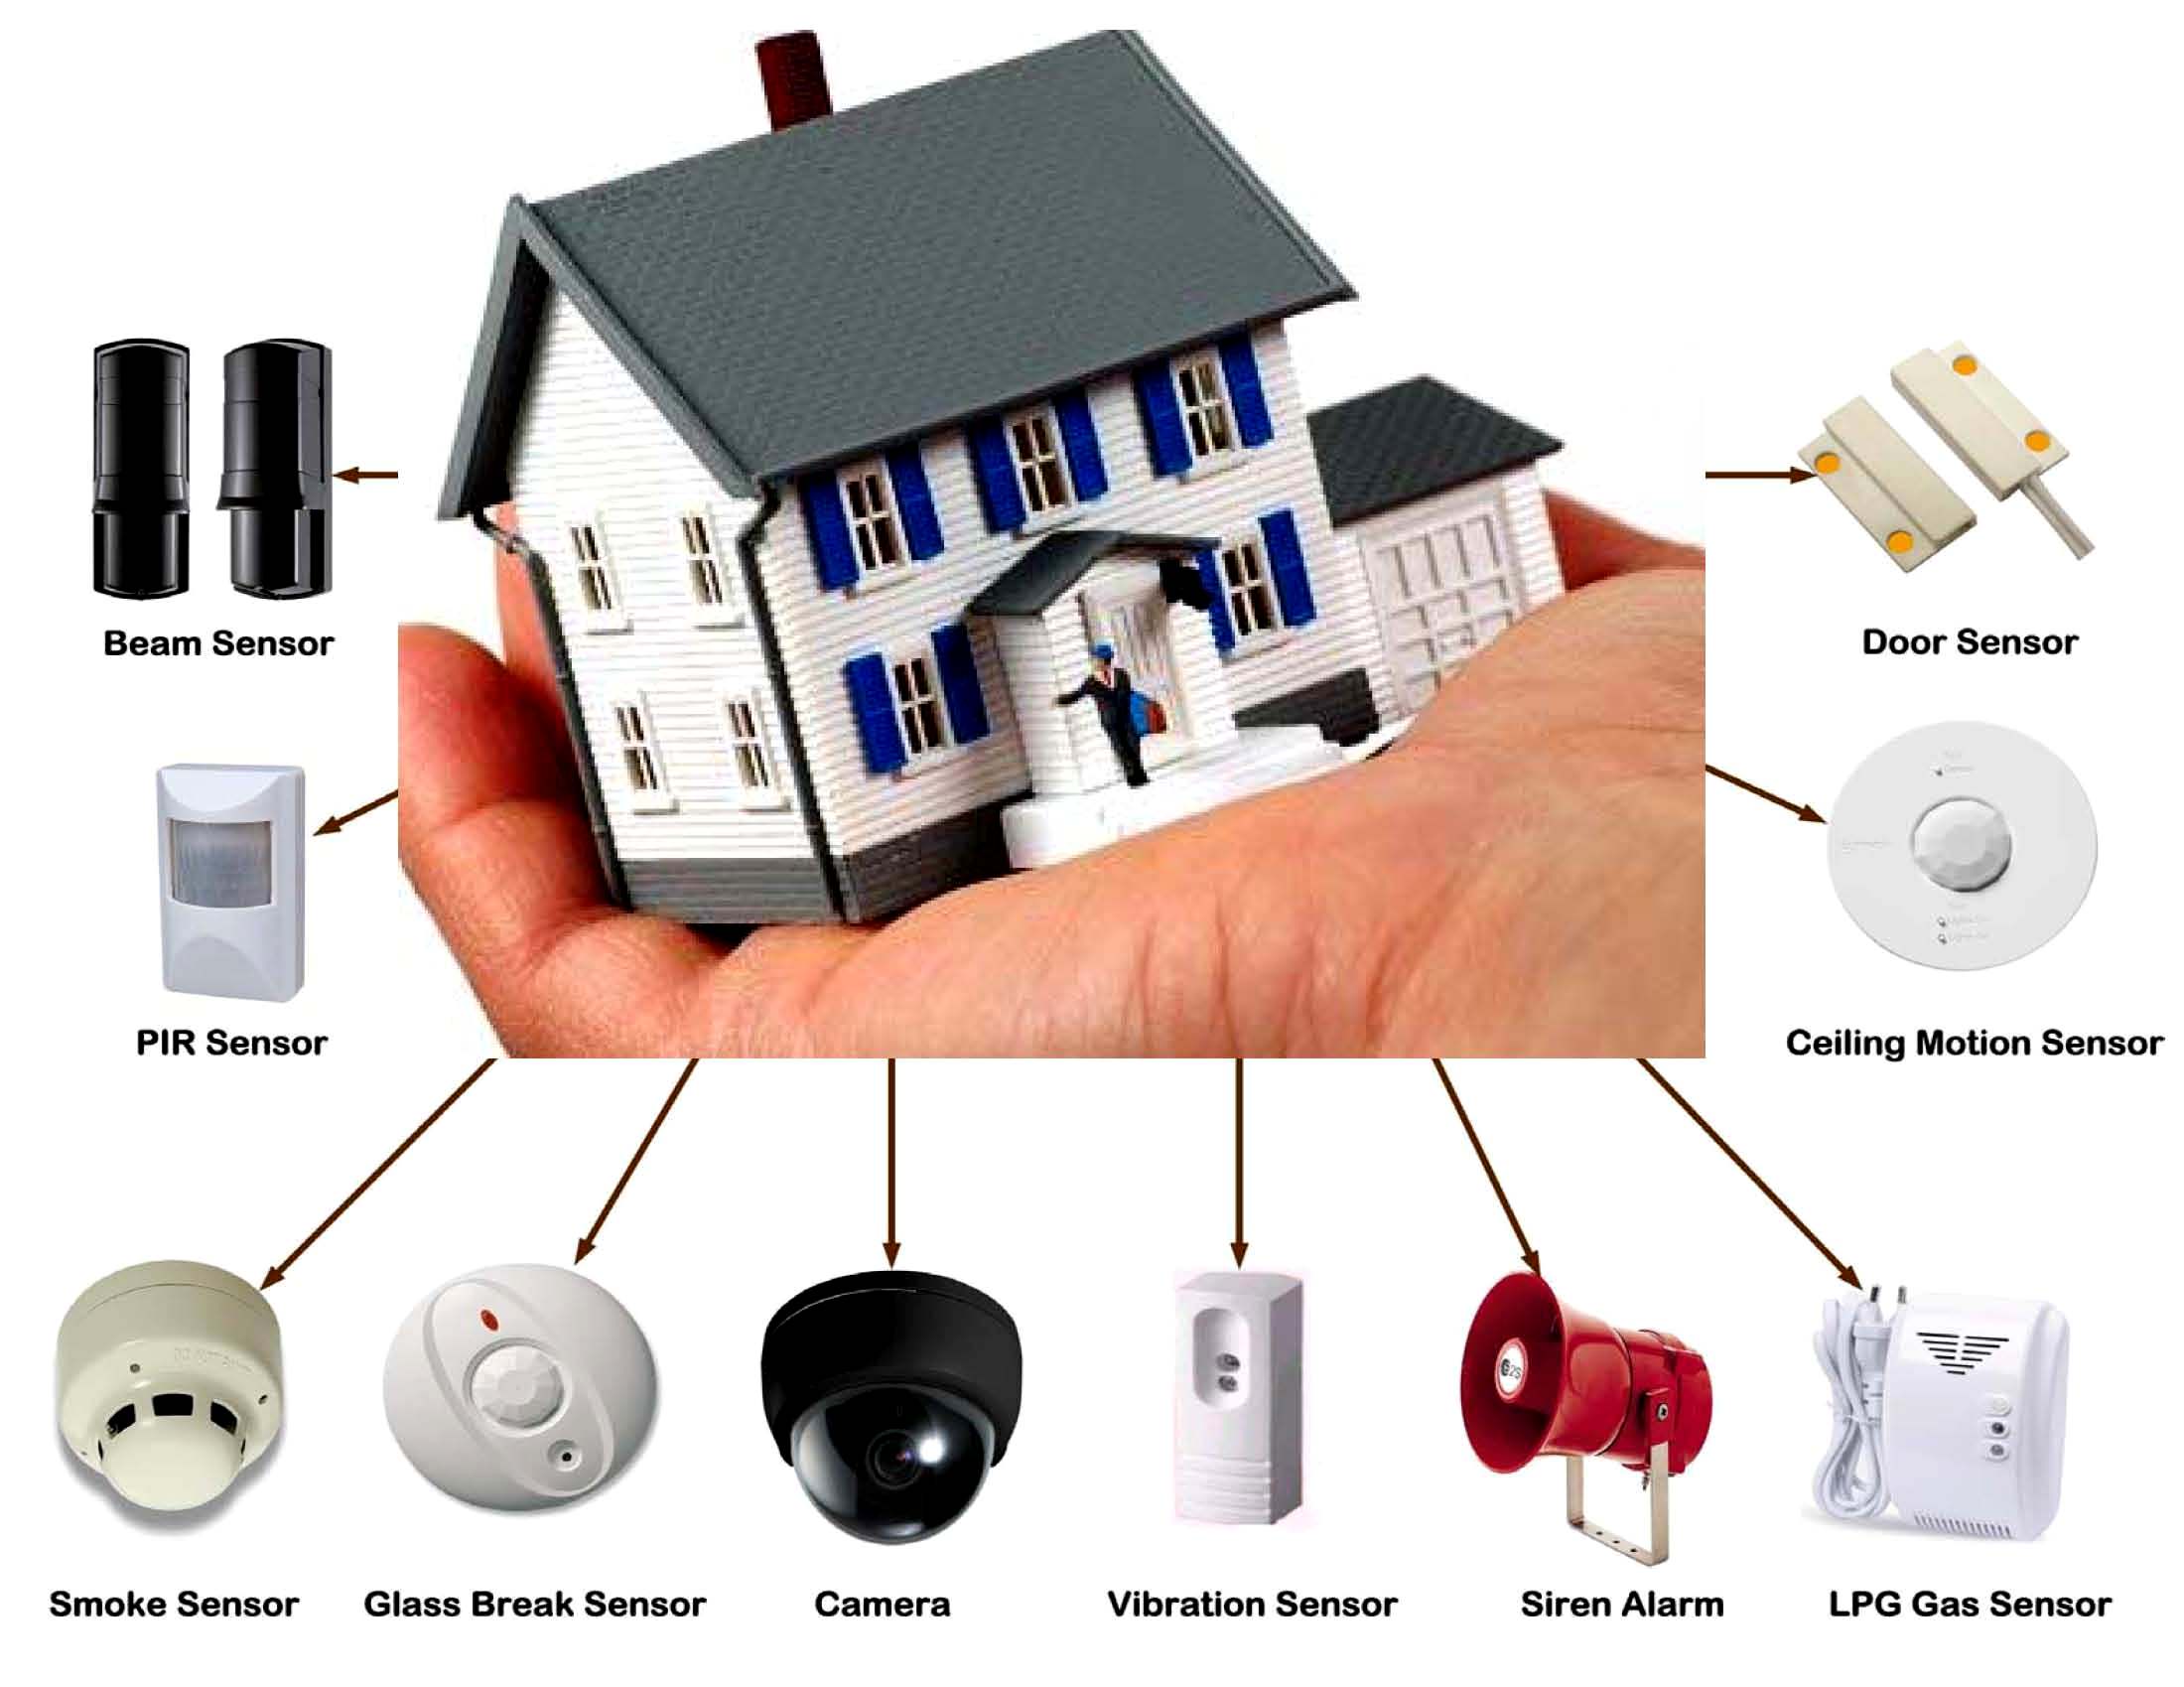 How to Install a DIY Security System Yourself